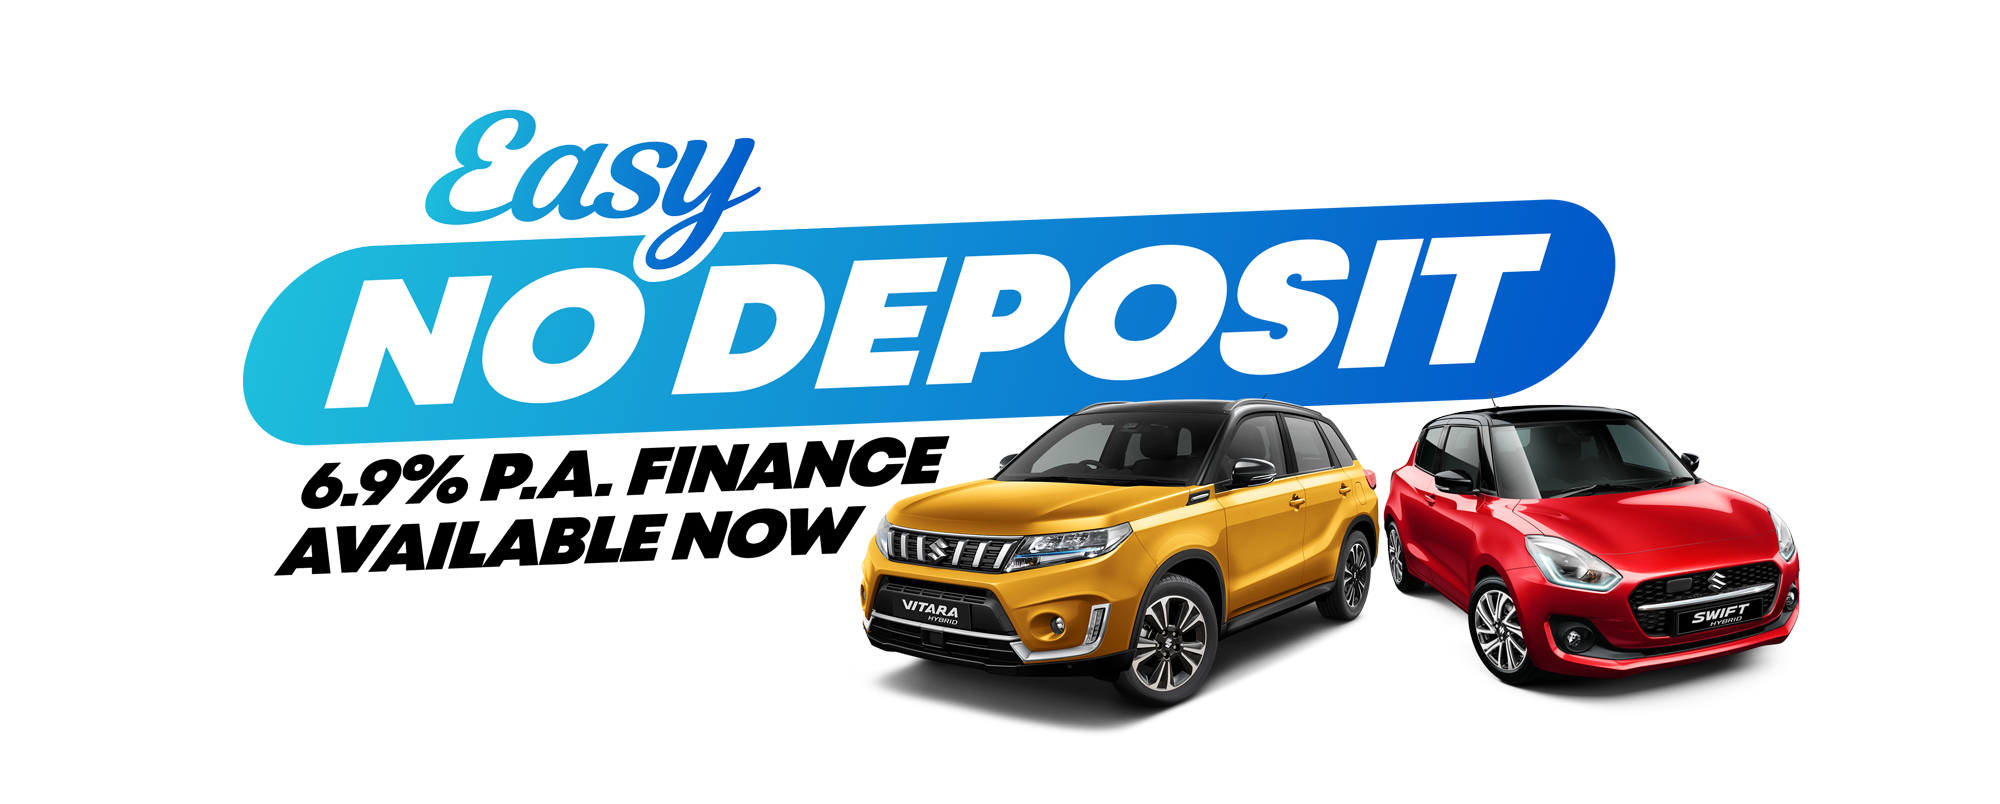 Easy No Deposit - 6.9% P.A. Finance Available Now